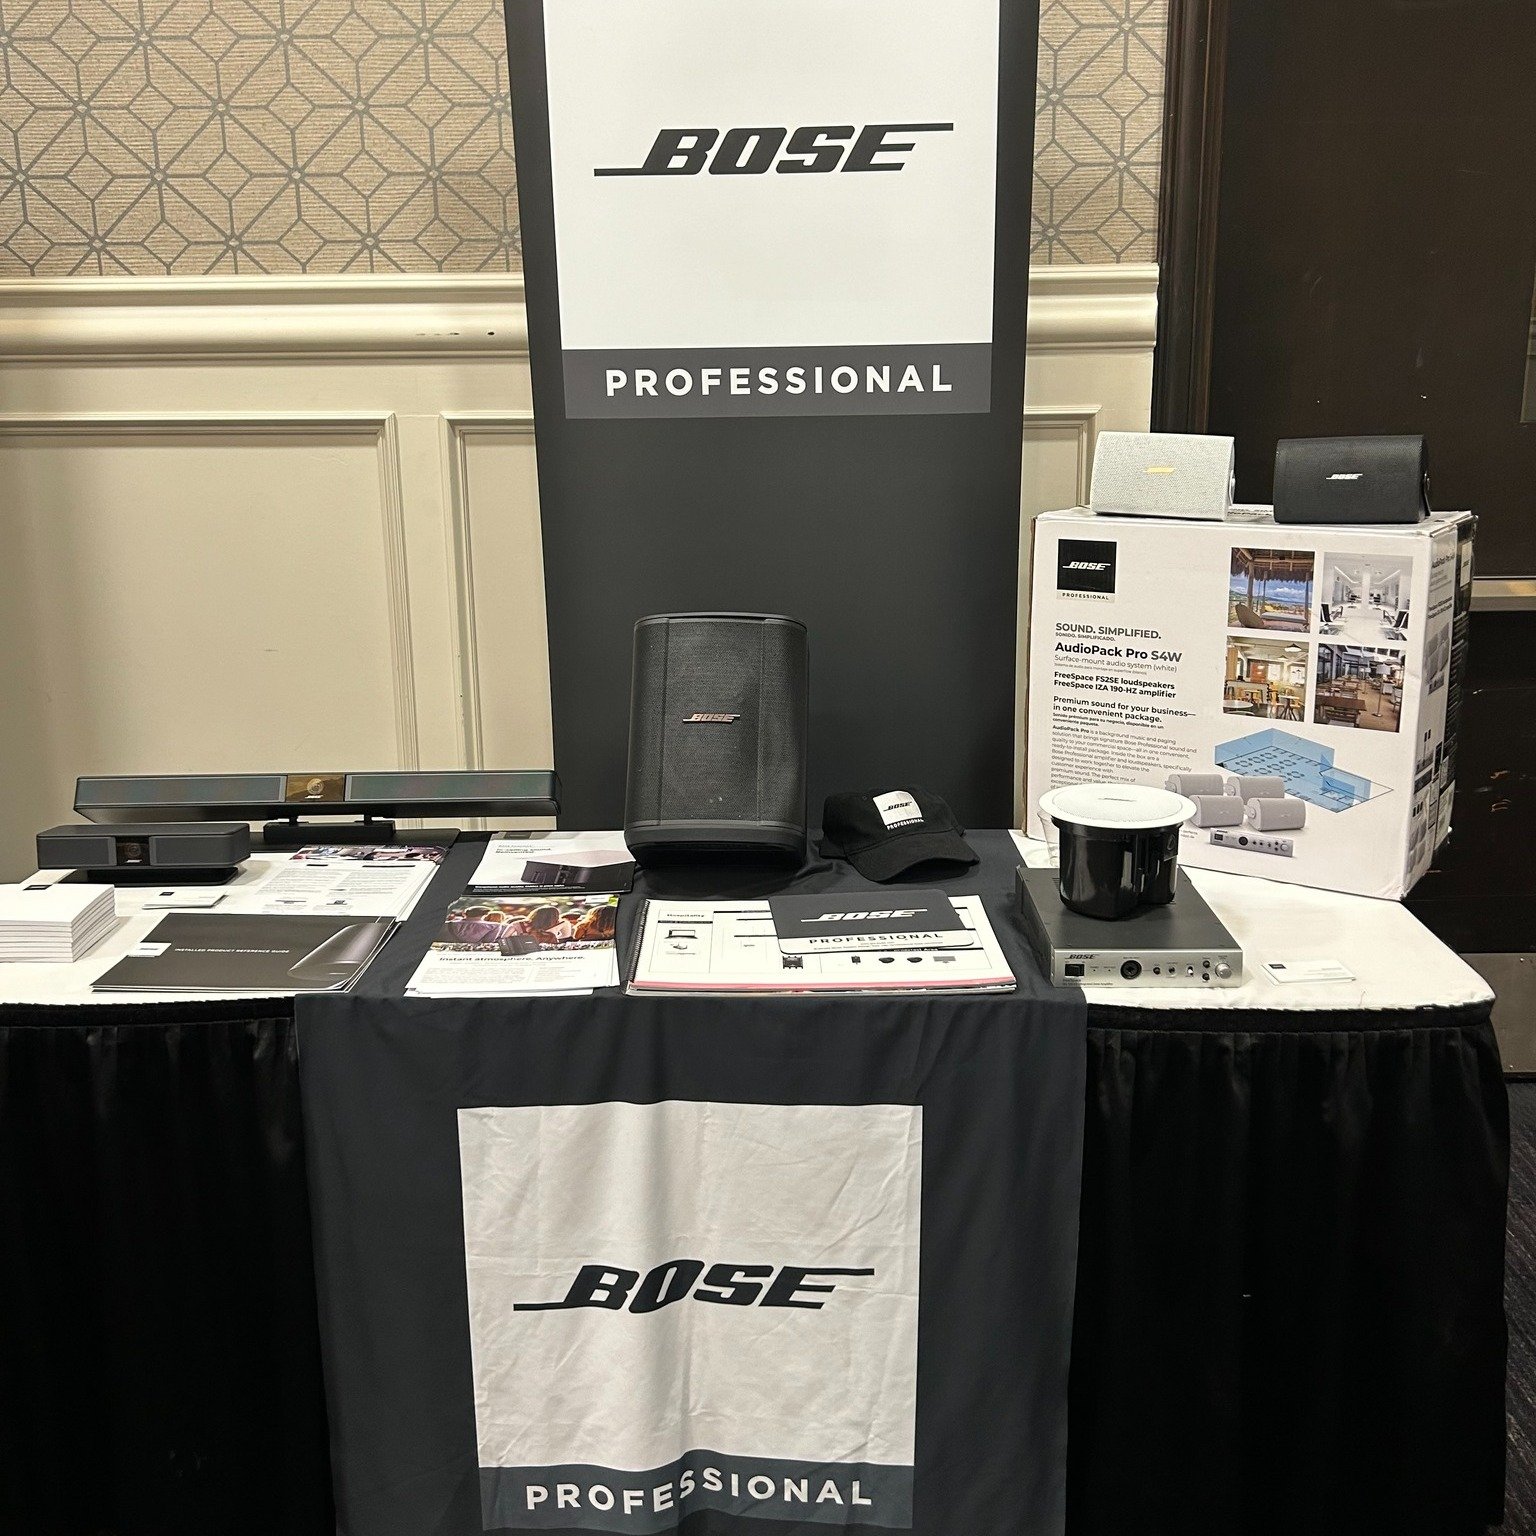 We had a great time at the ADI Expo in Detroit with our partners at Bose Professional yesterday!

Josh was there along side David Curran from Bose Professional showing the VB1, VS-1, S1 Pro+, and the AudioPack Pro. Thanks to all who attended and stop